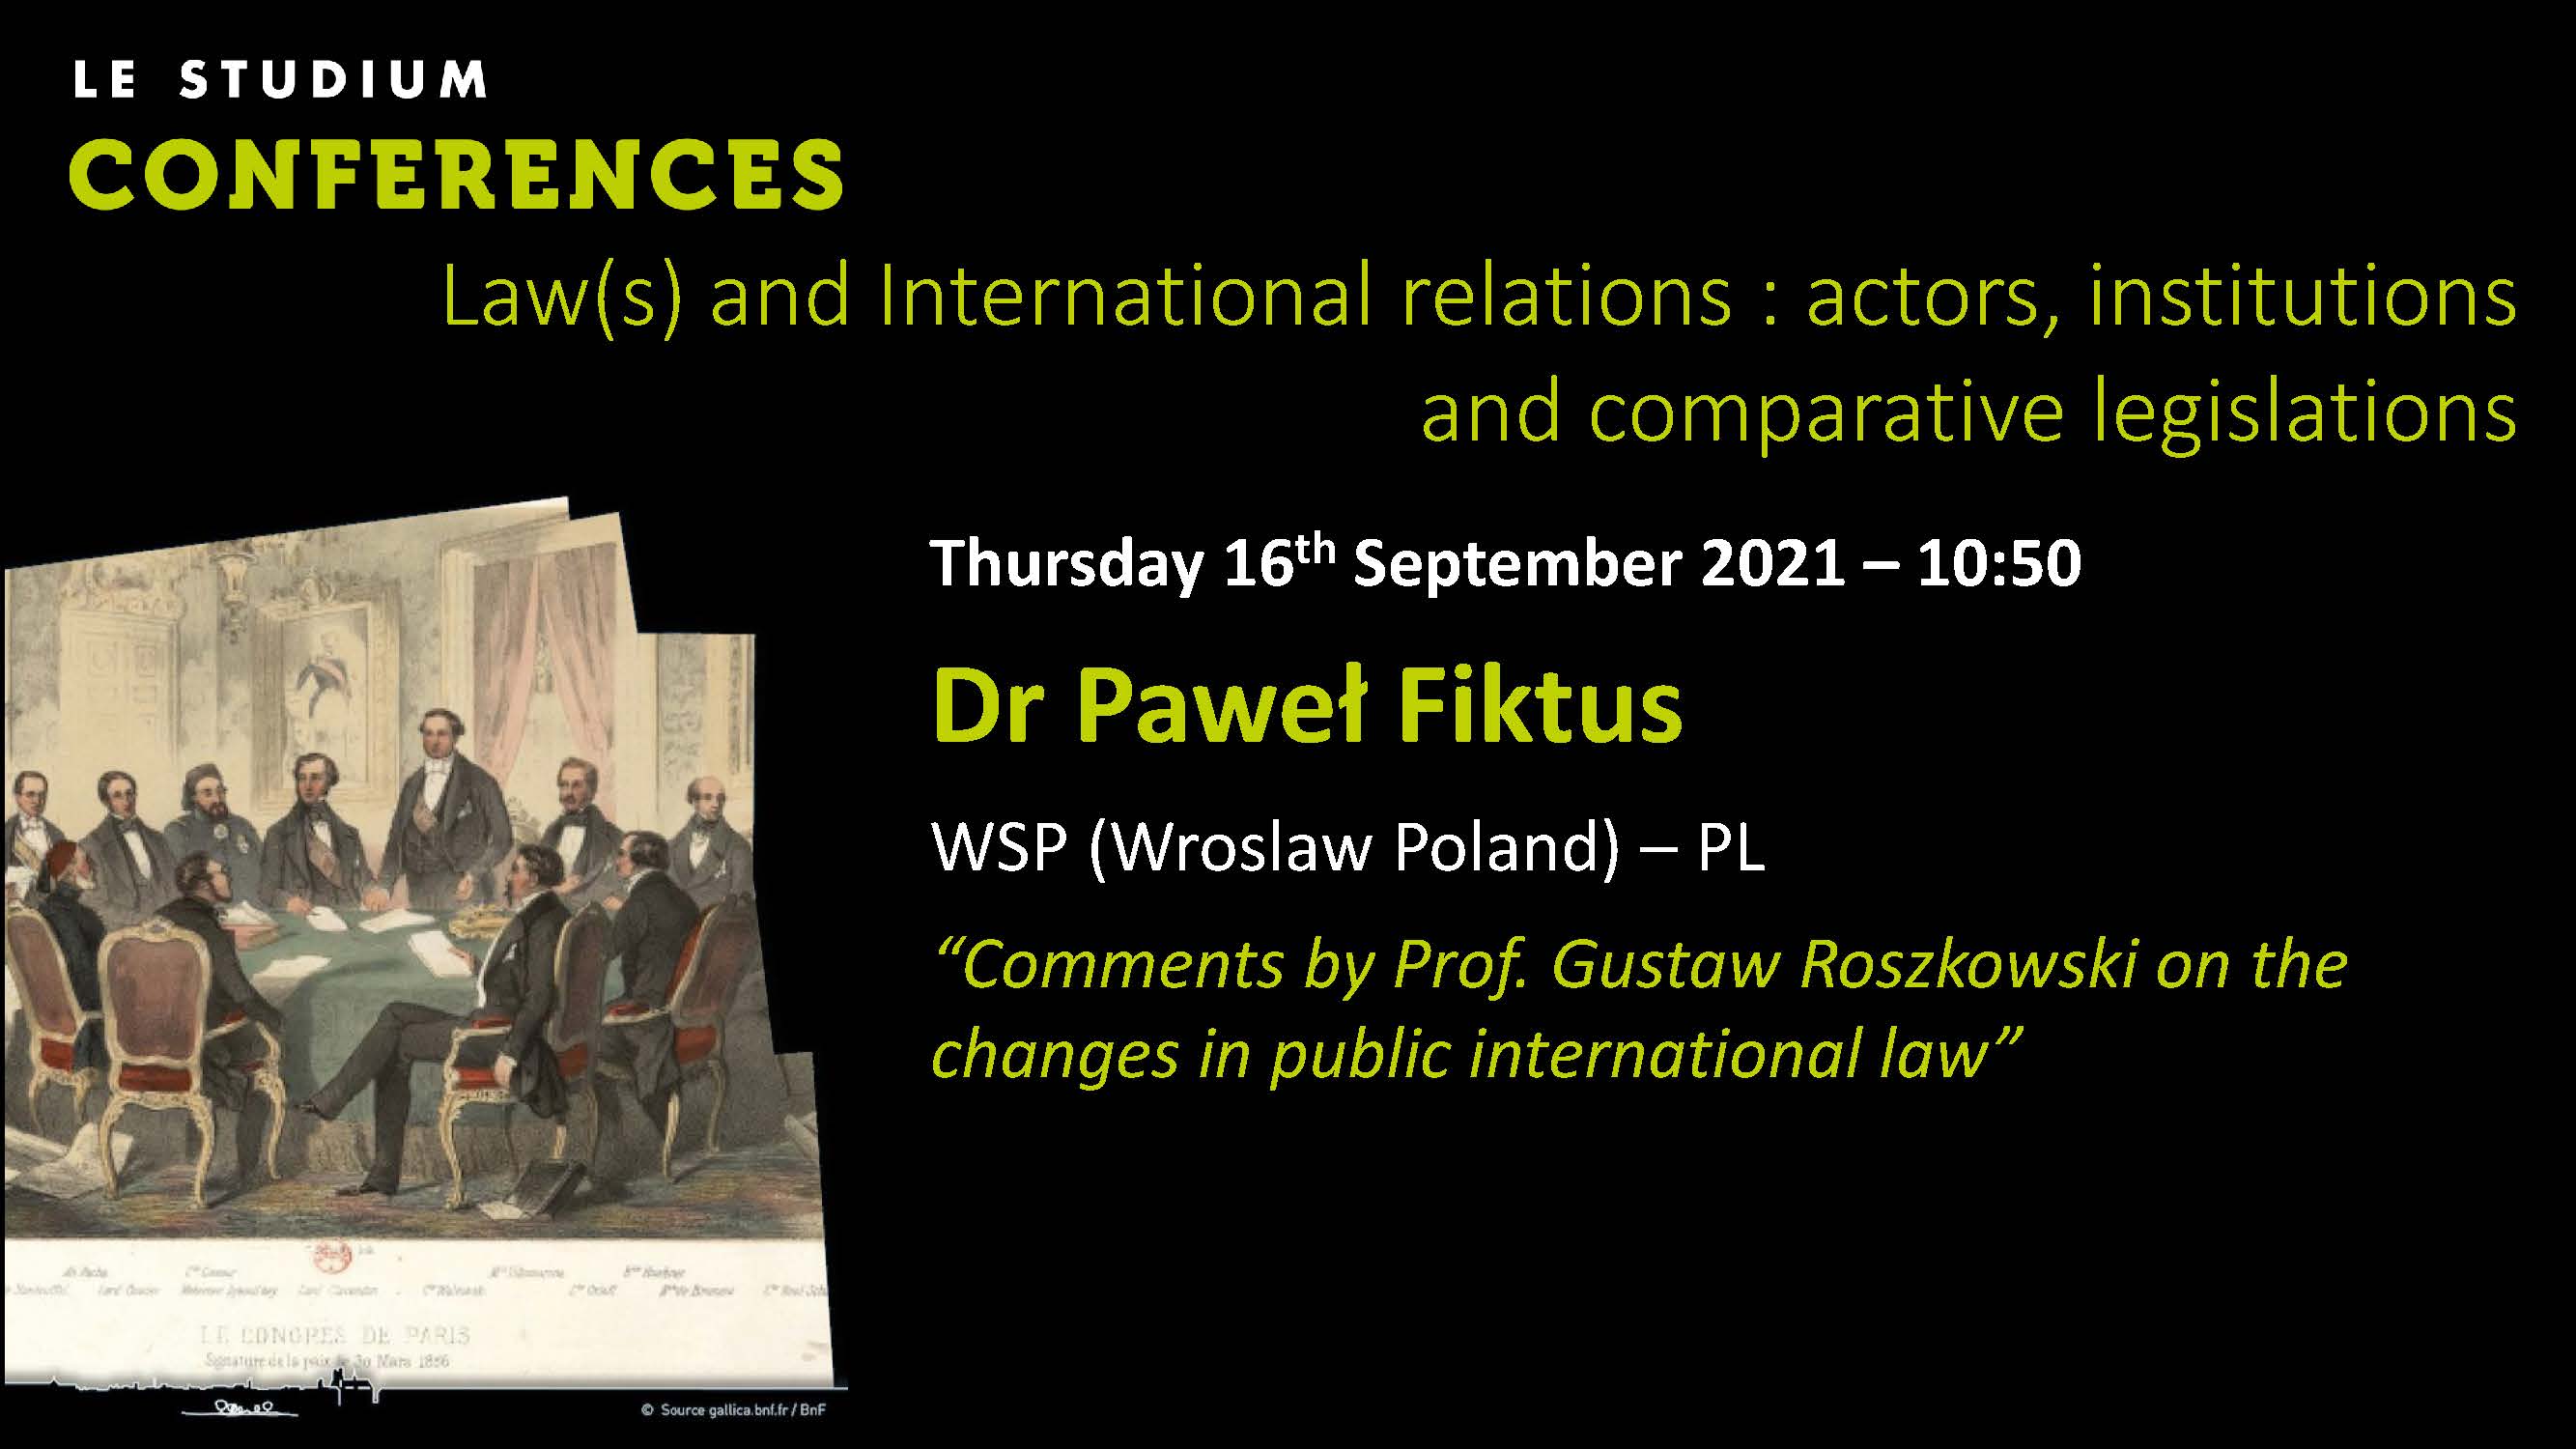 Paweł Fiktus - Comments by Prof. Gustaw Roszkowski on the changes in public international law